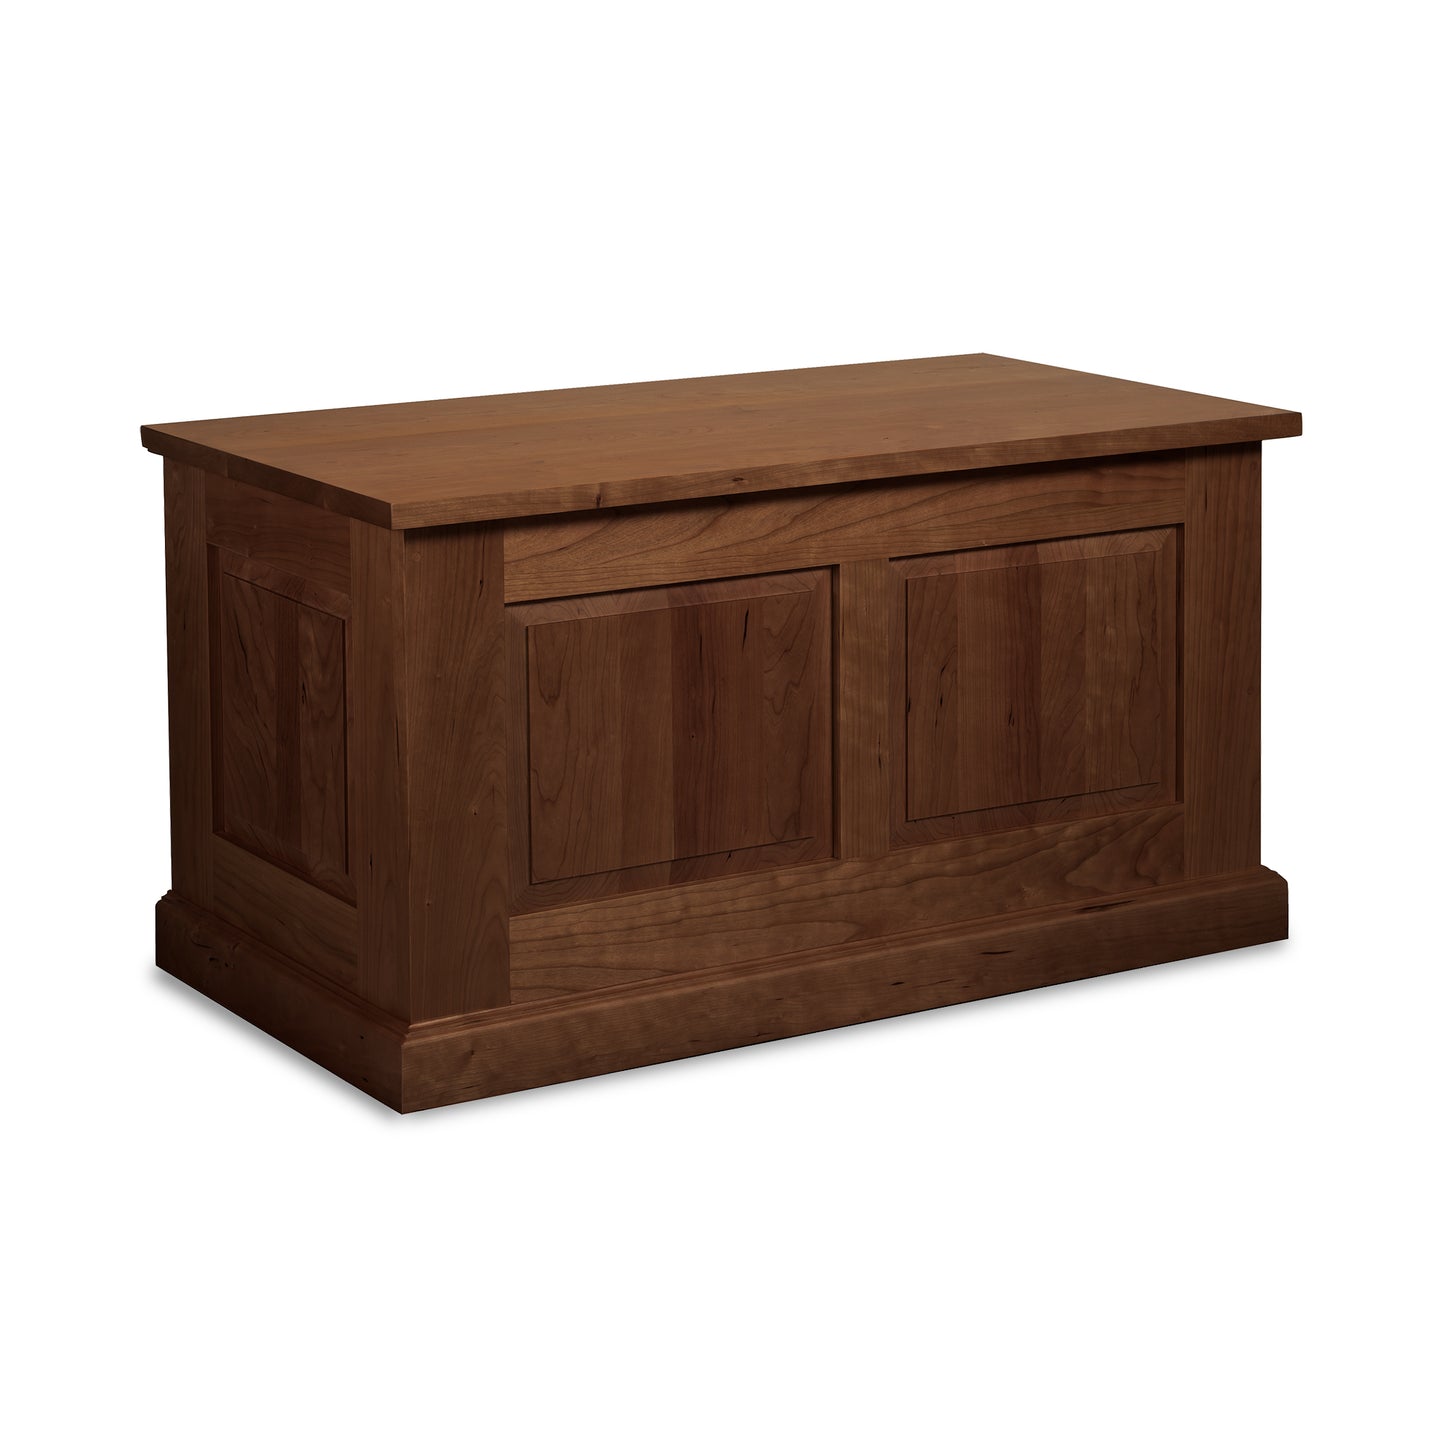 A sustainably harvested wooden chest with a lid, made from North American hardwoods. This exquisite Lyndon Furniture New England Shaker Blanket Box is perfect for storing and organizing your belongings.